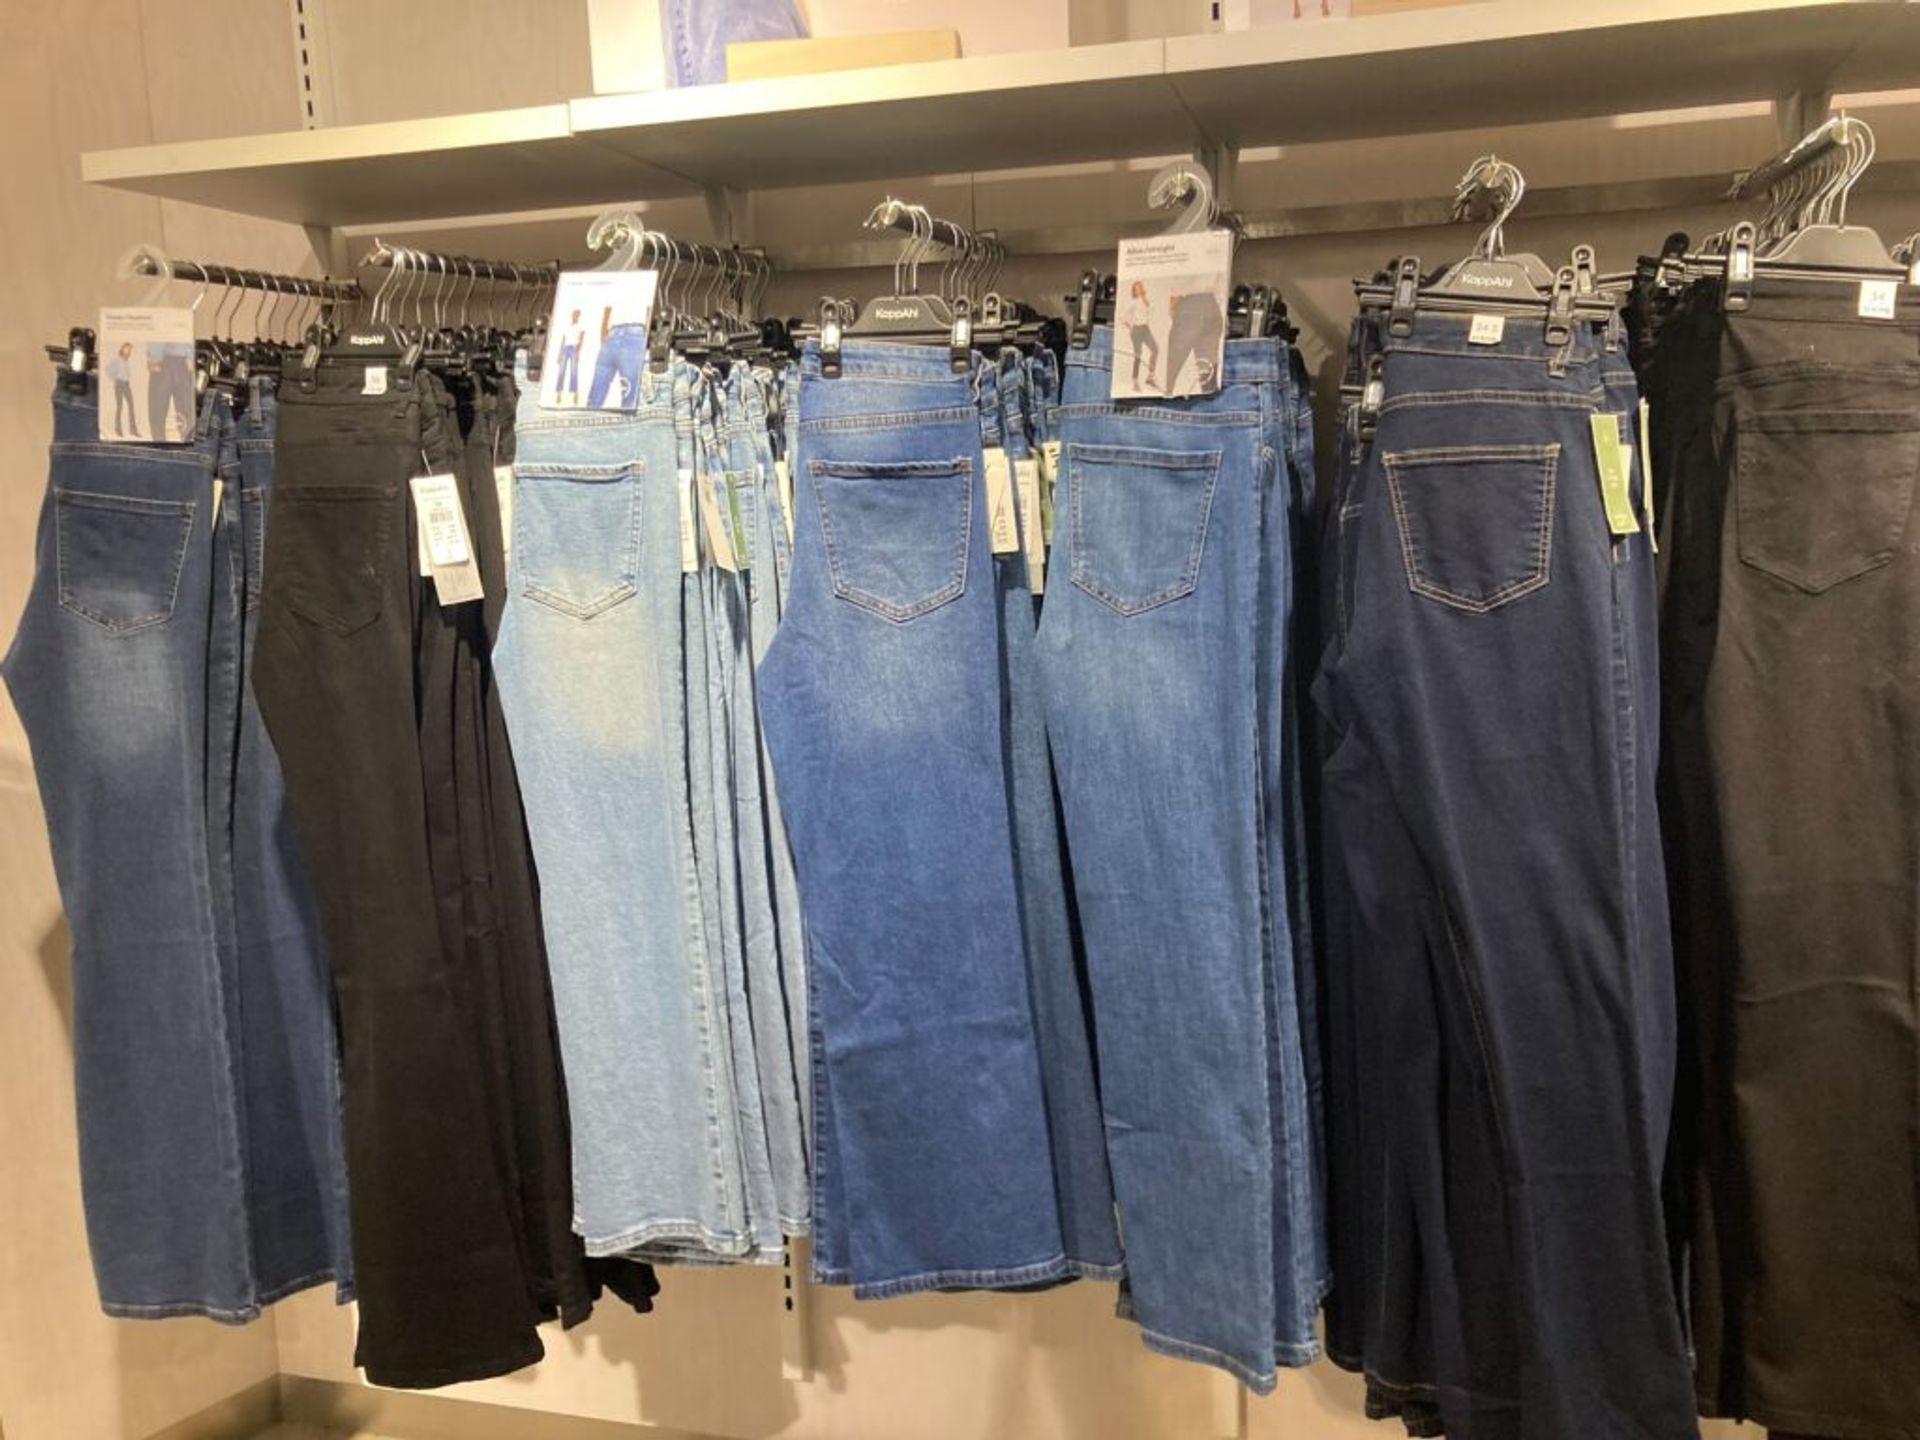 A variety of jeans.